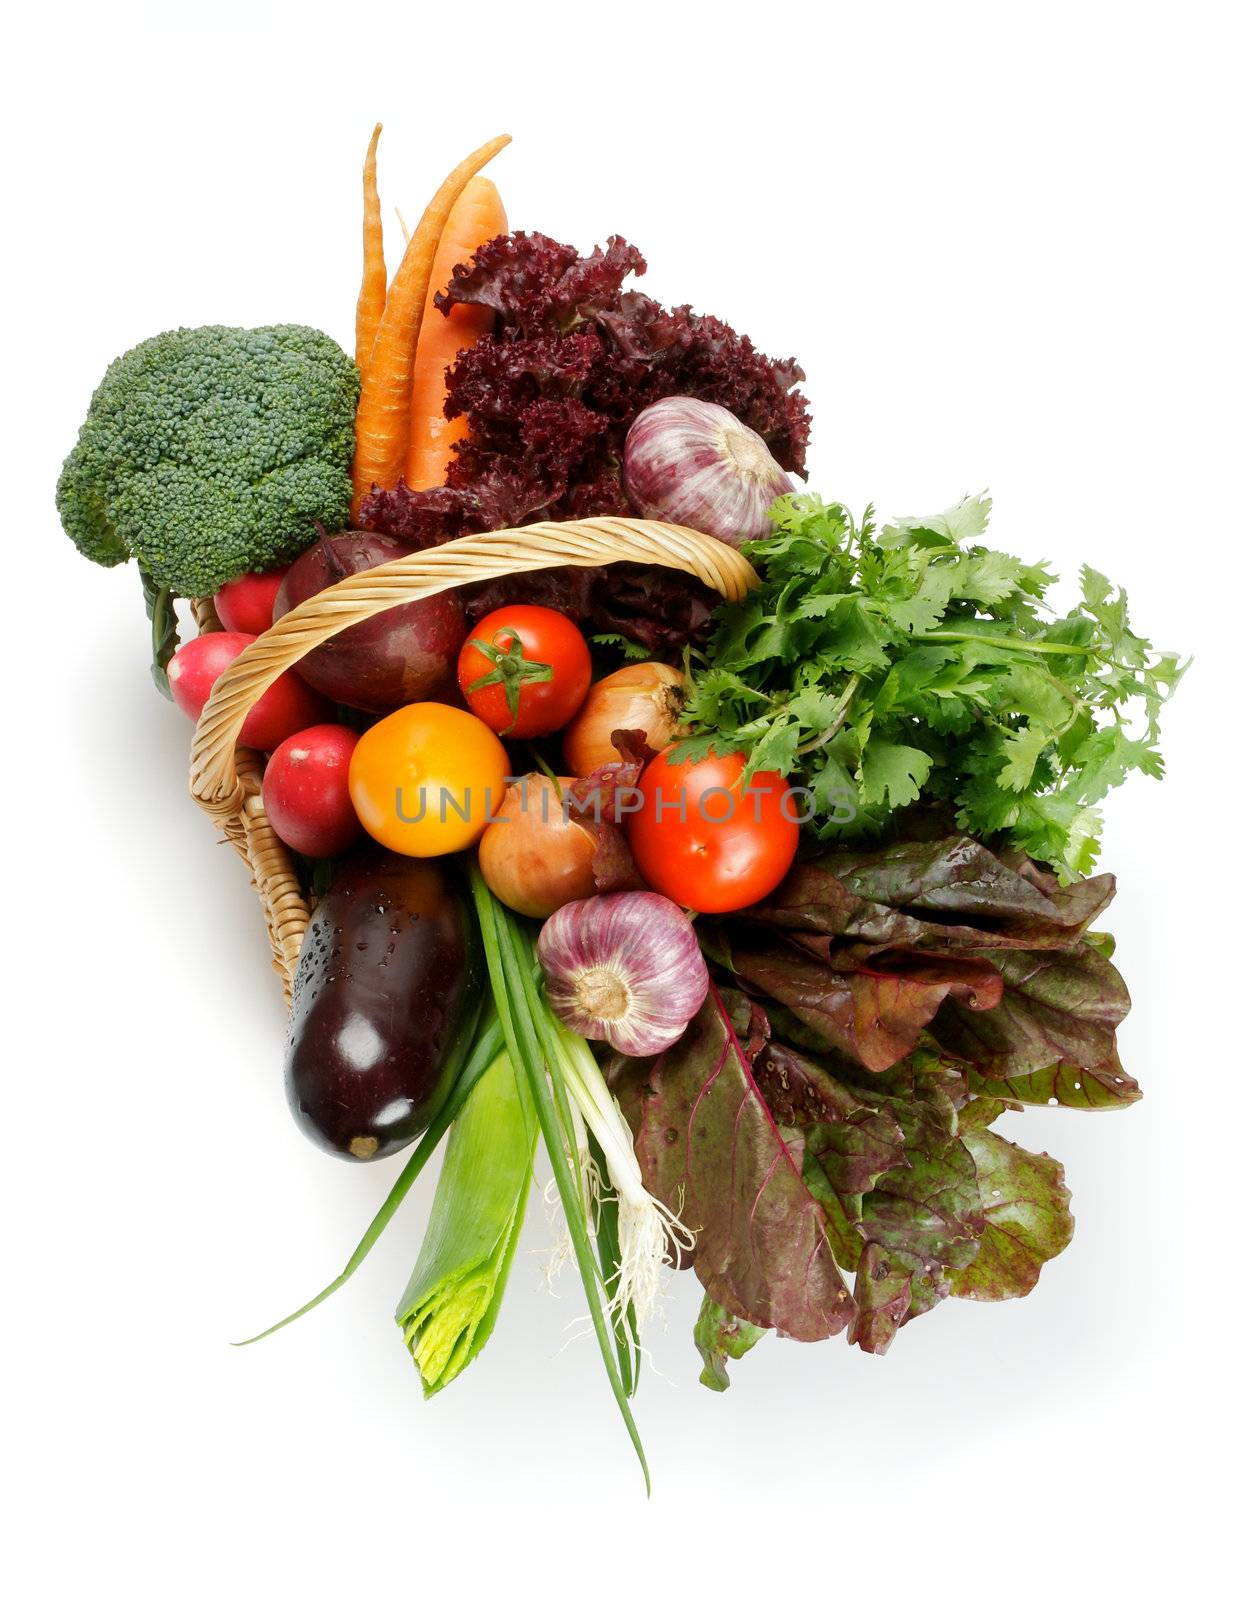 Basket of Various Vegetables with Broccoli, radishes, lettuce, onions, leeks, beets, carrots, red tomatoes, yellow tomatoes, parsley top view isolated on white background